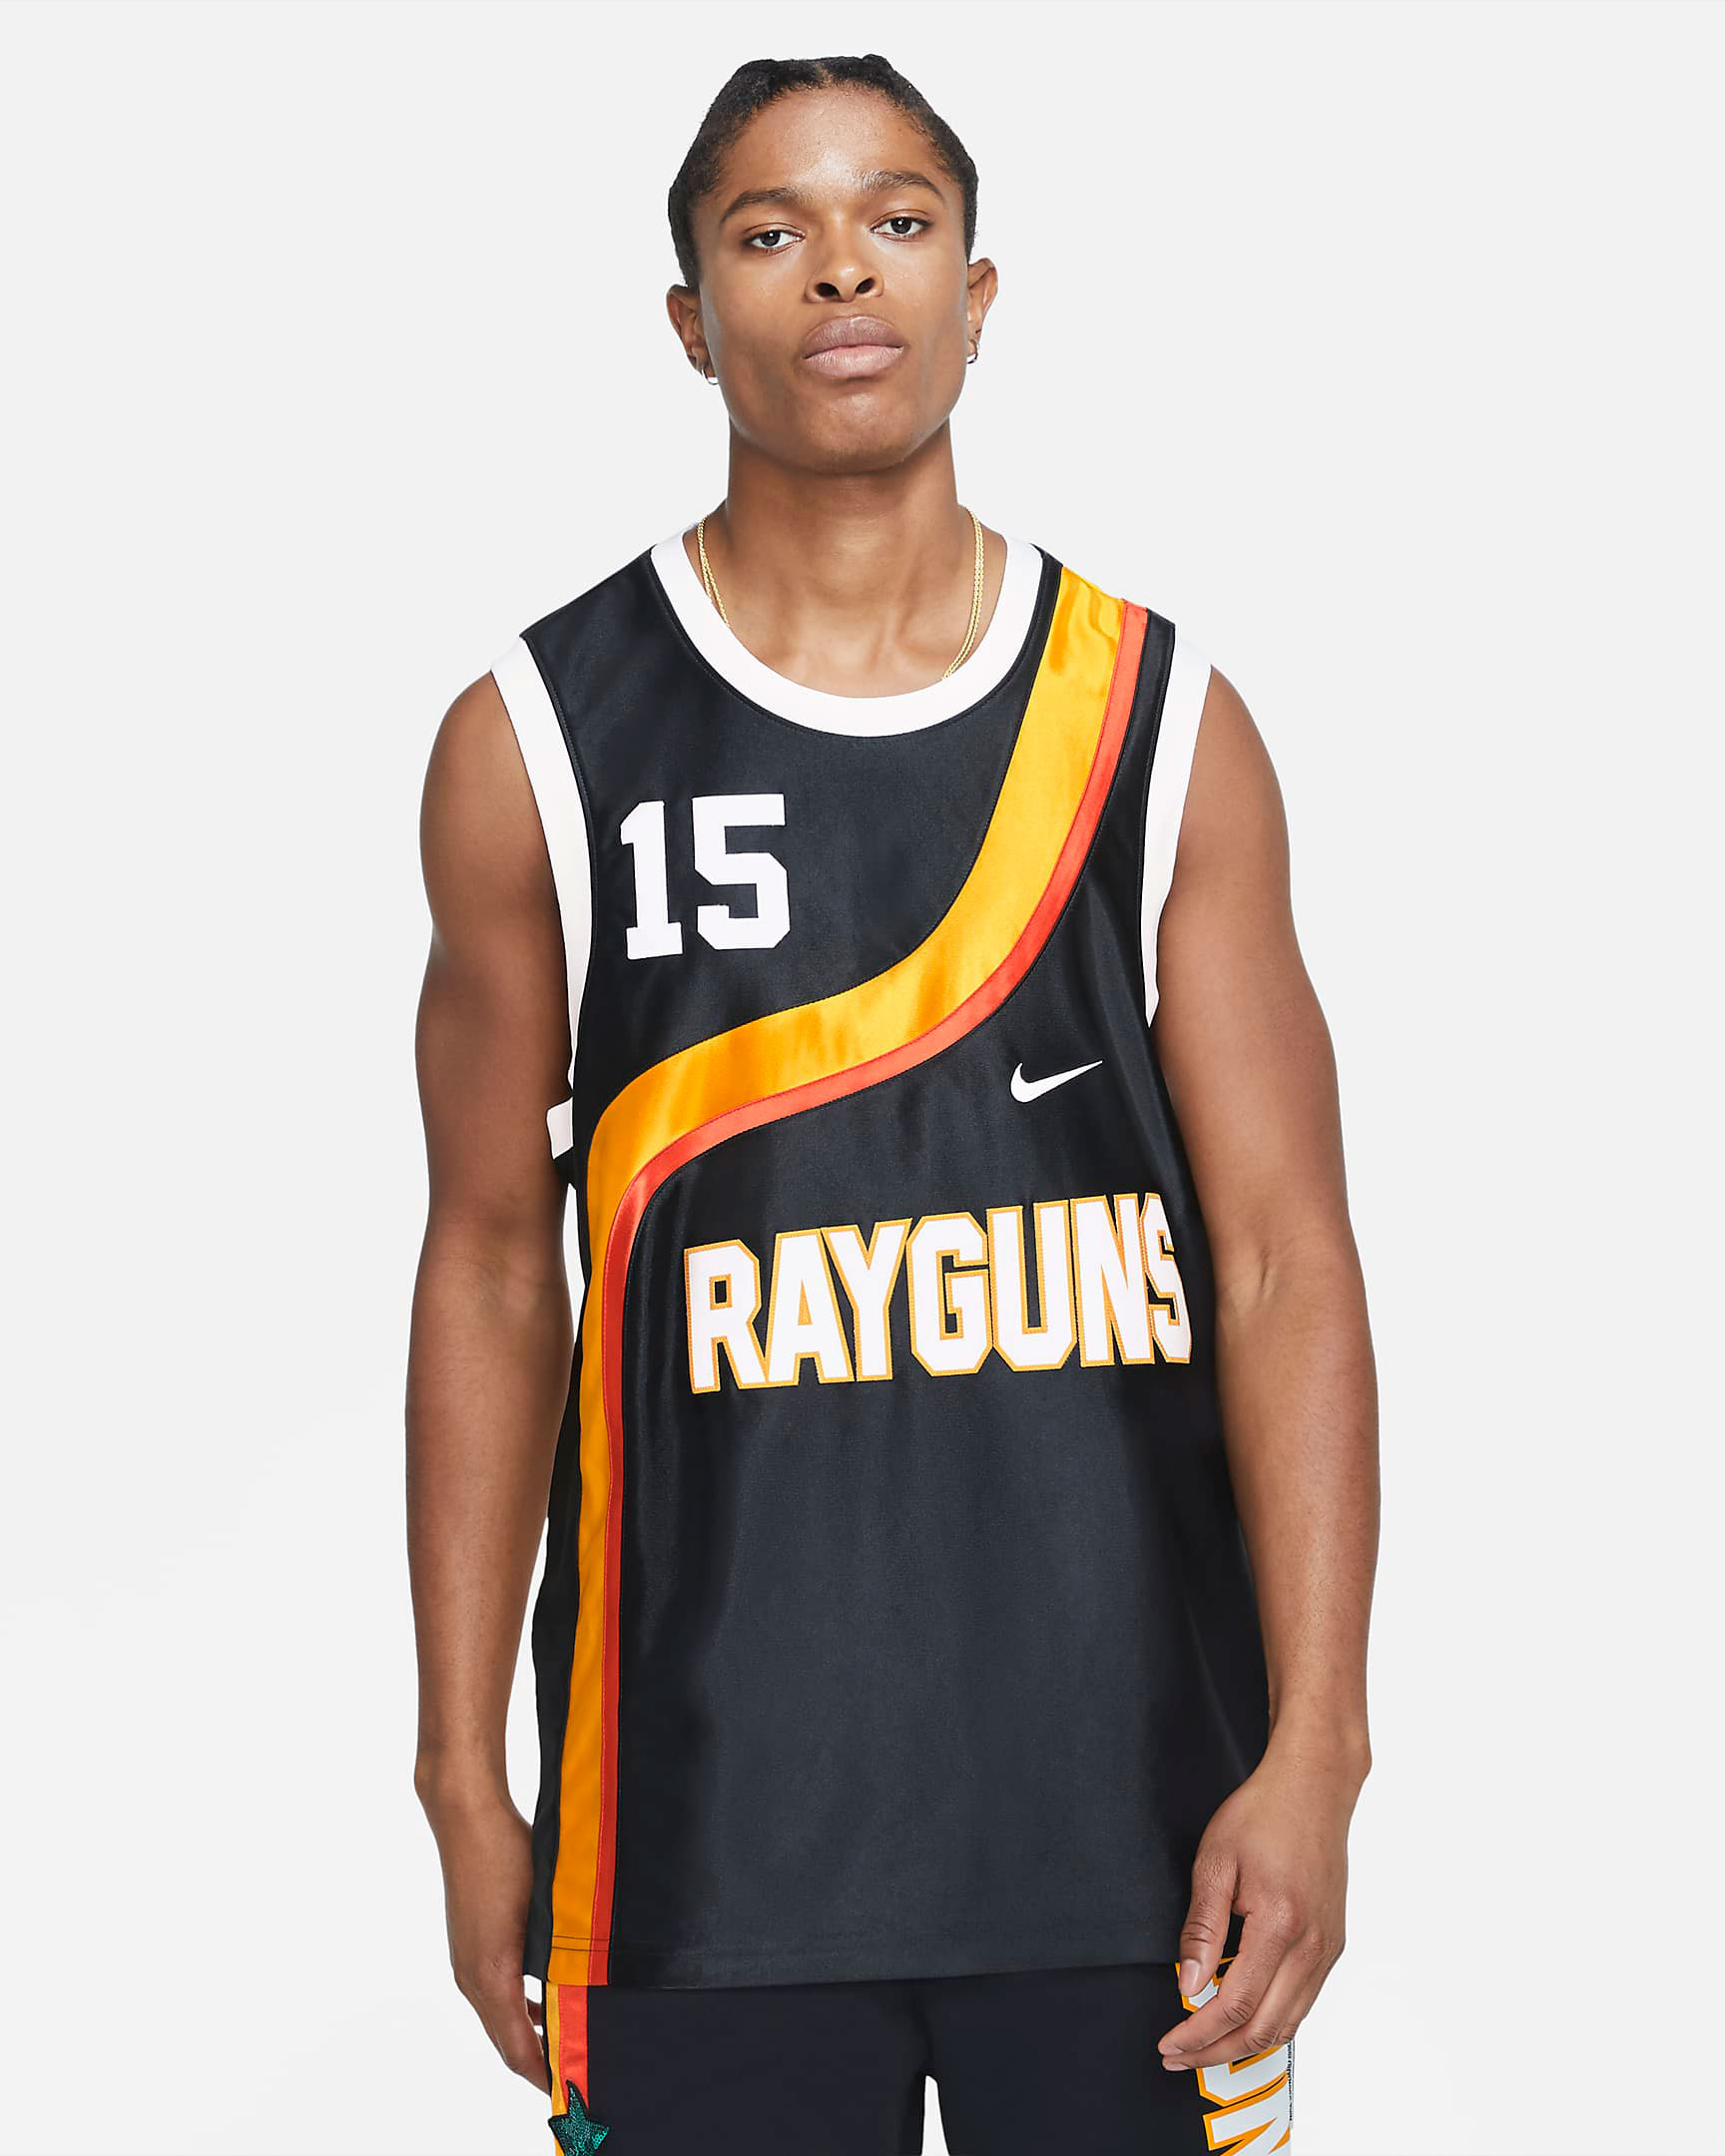 nike-roswell-rayguns-black-carter-jersey-1